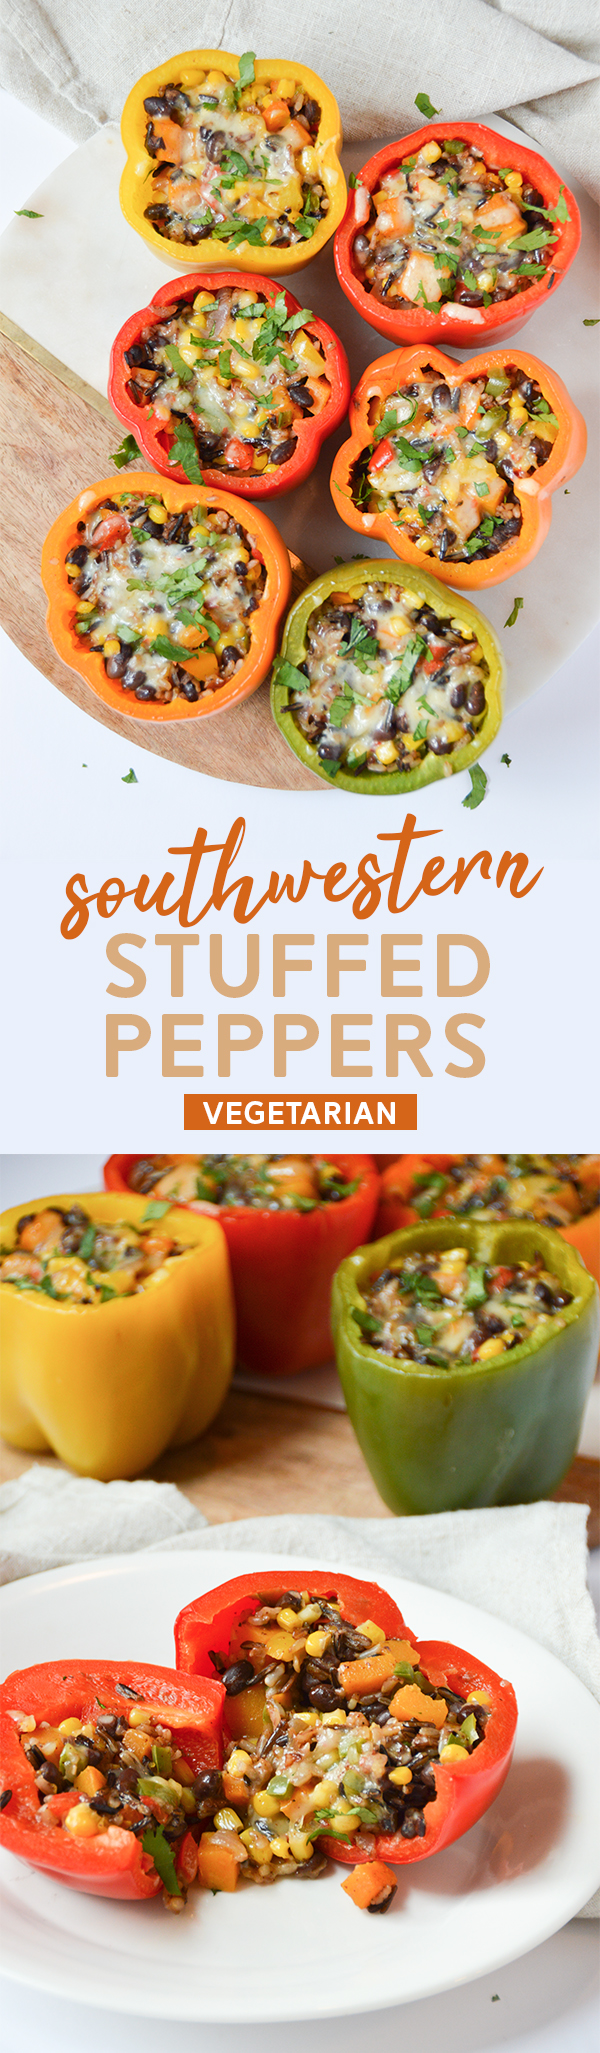 Southwestern Stuffed Bell Peppers - This delicious recipe is packed with flavor and vegetarian (or easily vegan). Try it this week! #vegetarian #recipe #plantbased #stuffedpeppers #southwestern